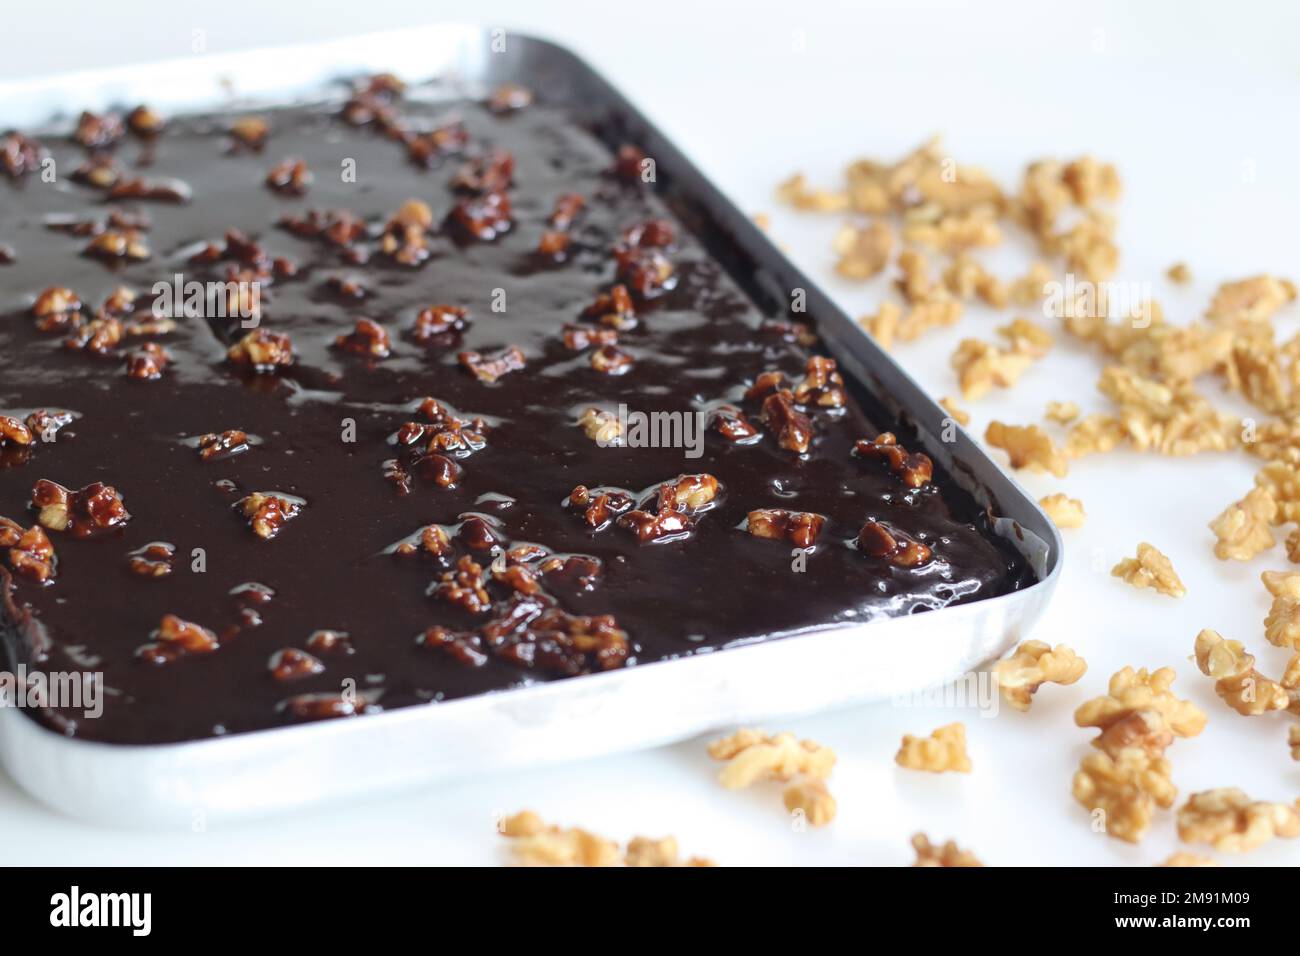 Texas Sheet Cake in baking pan. It is a large, thin chocolate cake topped with a rich chocolate walnut frosting. It's moist and fluffy, with a hint of Stock Photo